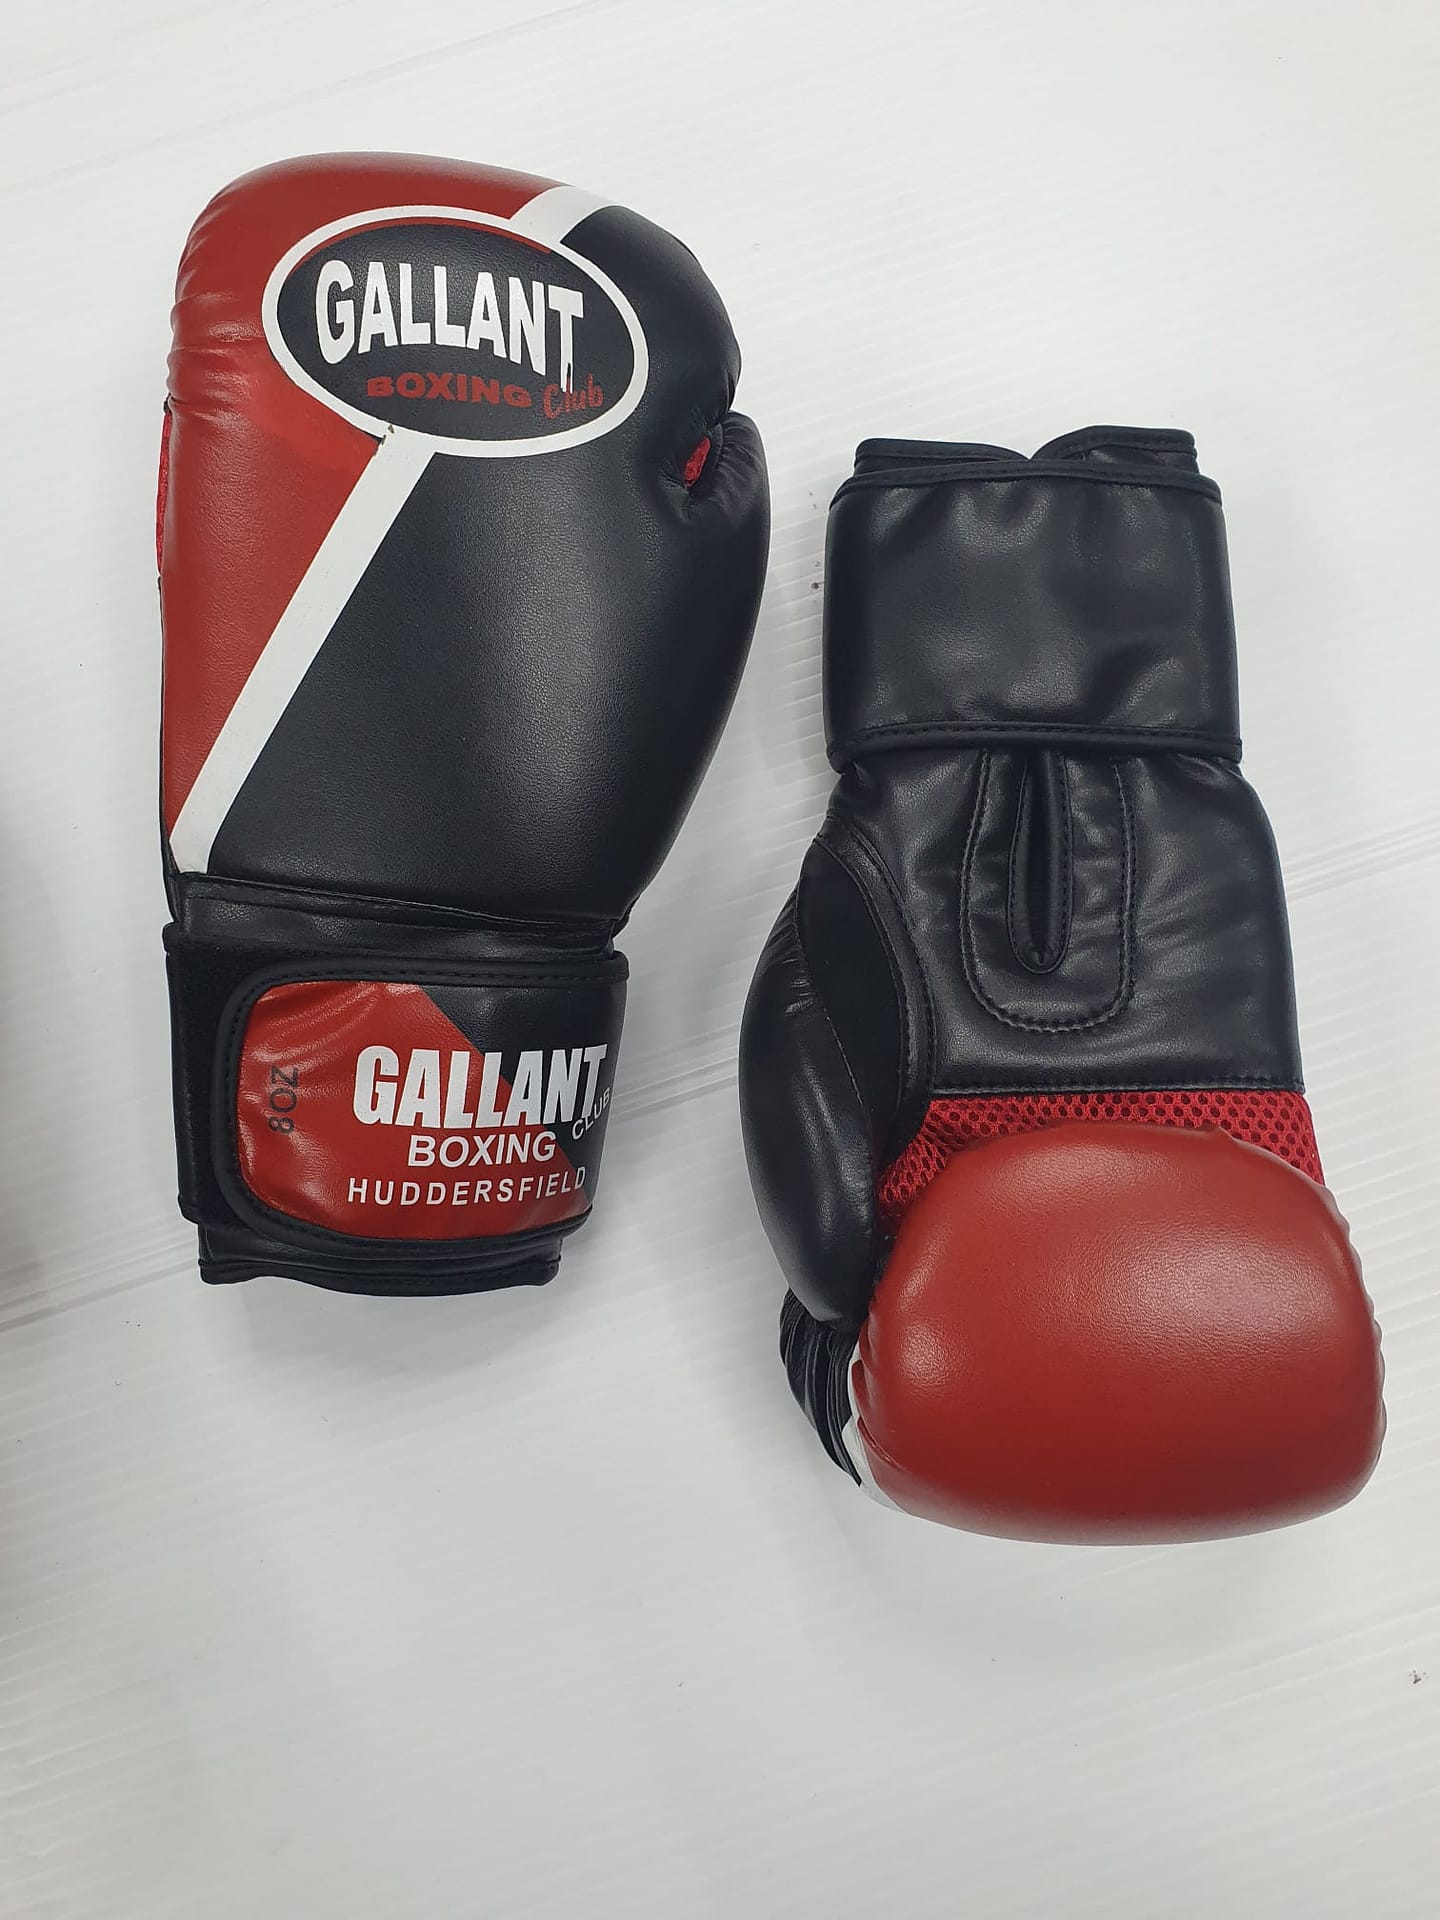 Gallant Boxing Gloves For Training, Sparring – Gallant Boxing club